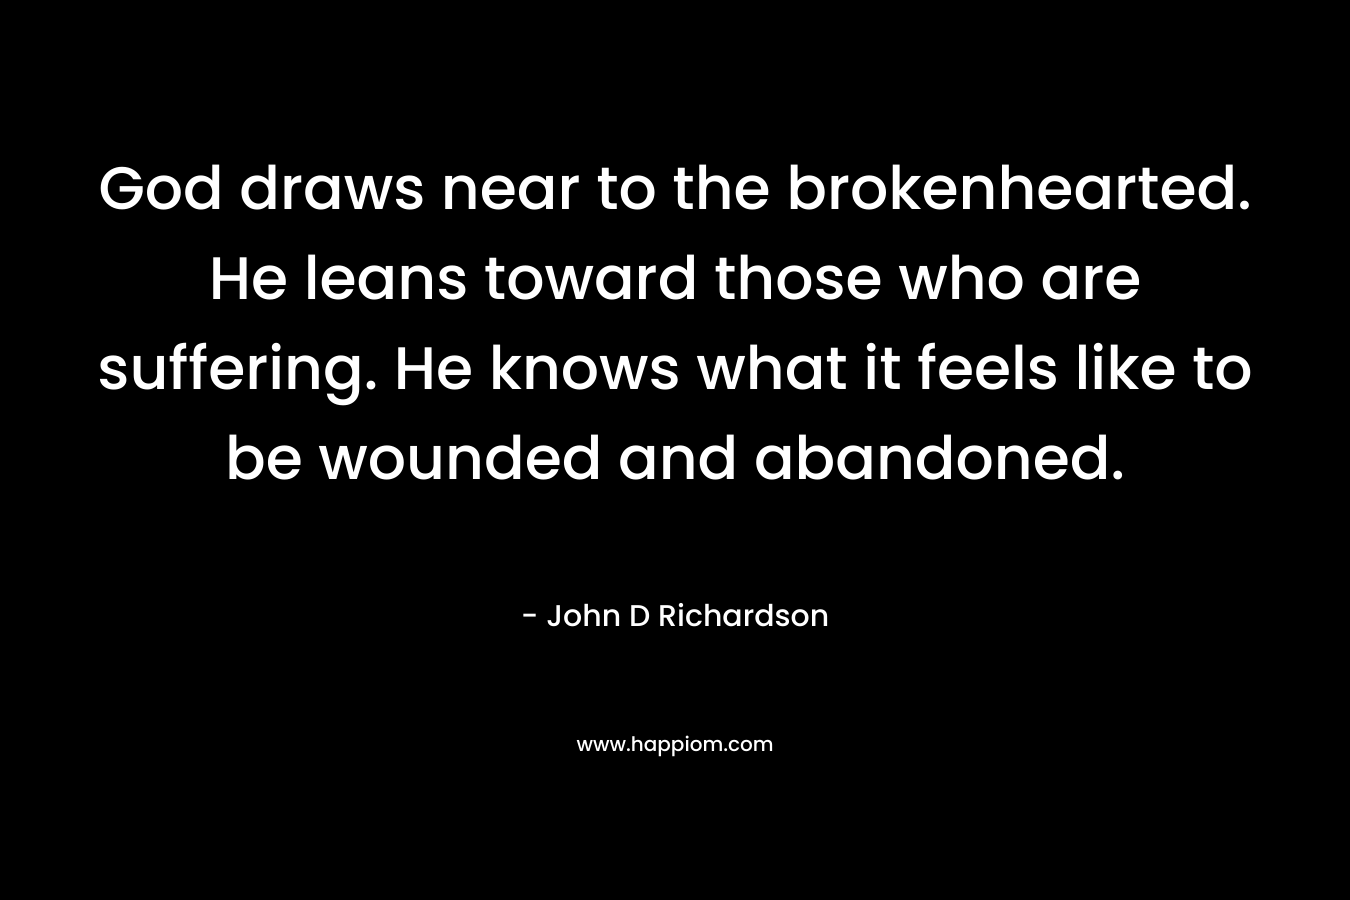 God draws near to the brokenhearted. He leans toward those who are suffering. He knows what it feels like to be wounded and abandoned.